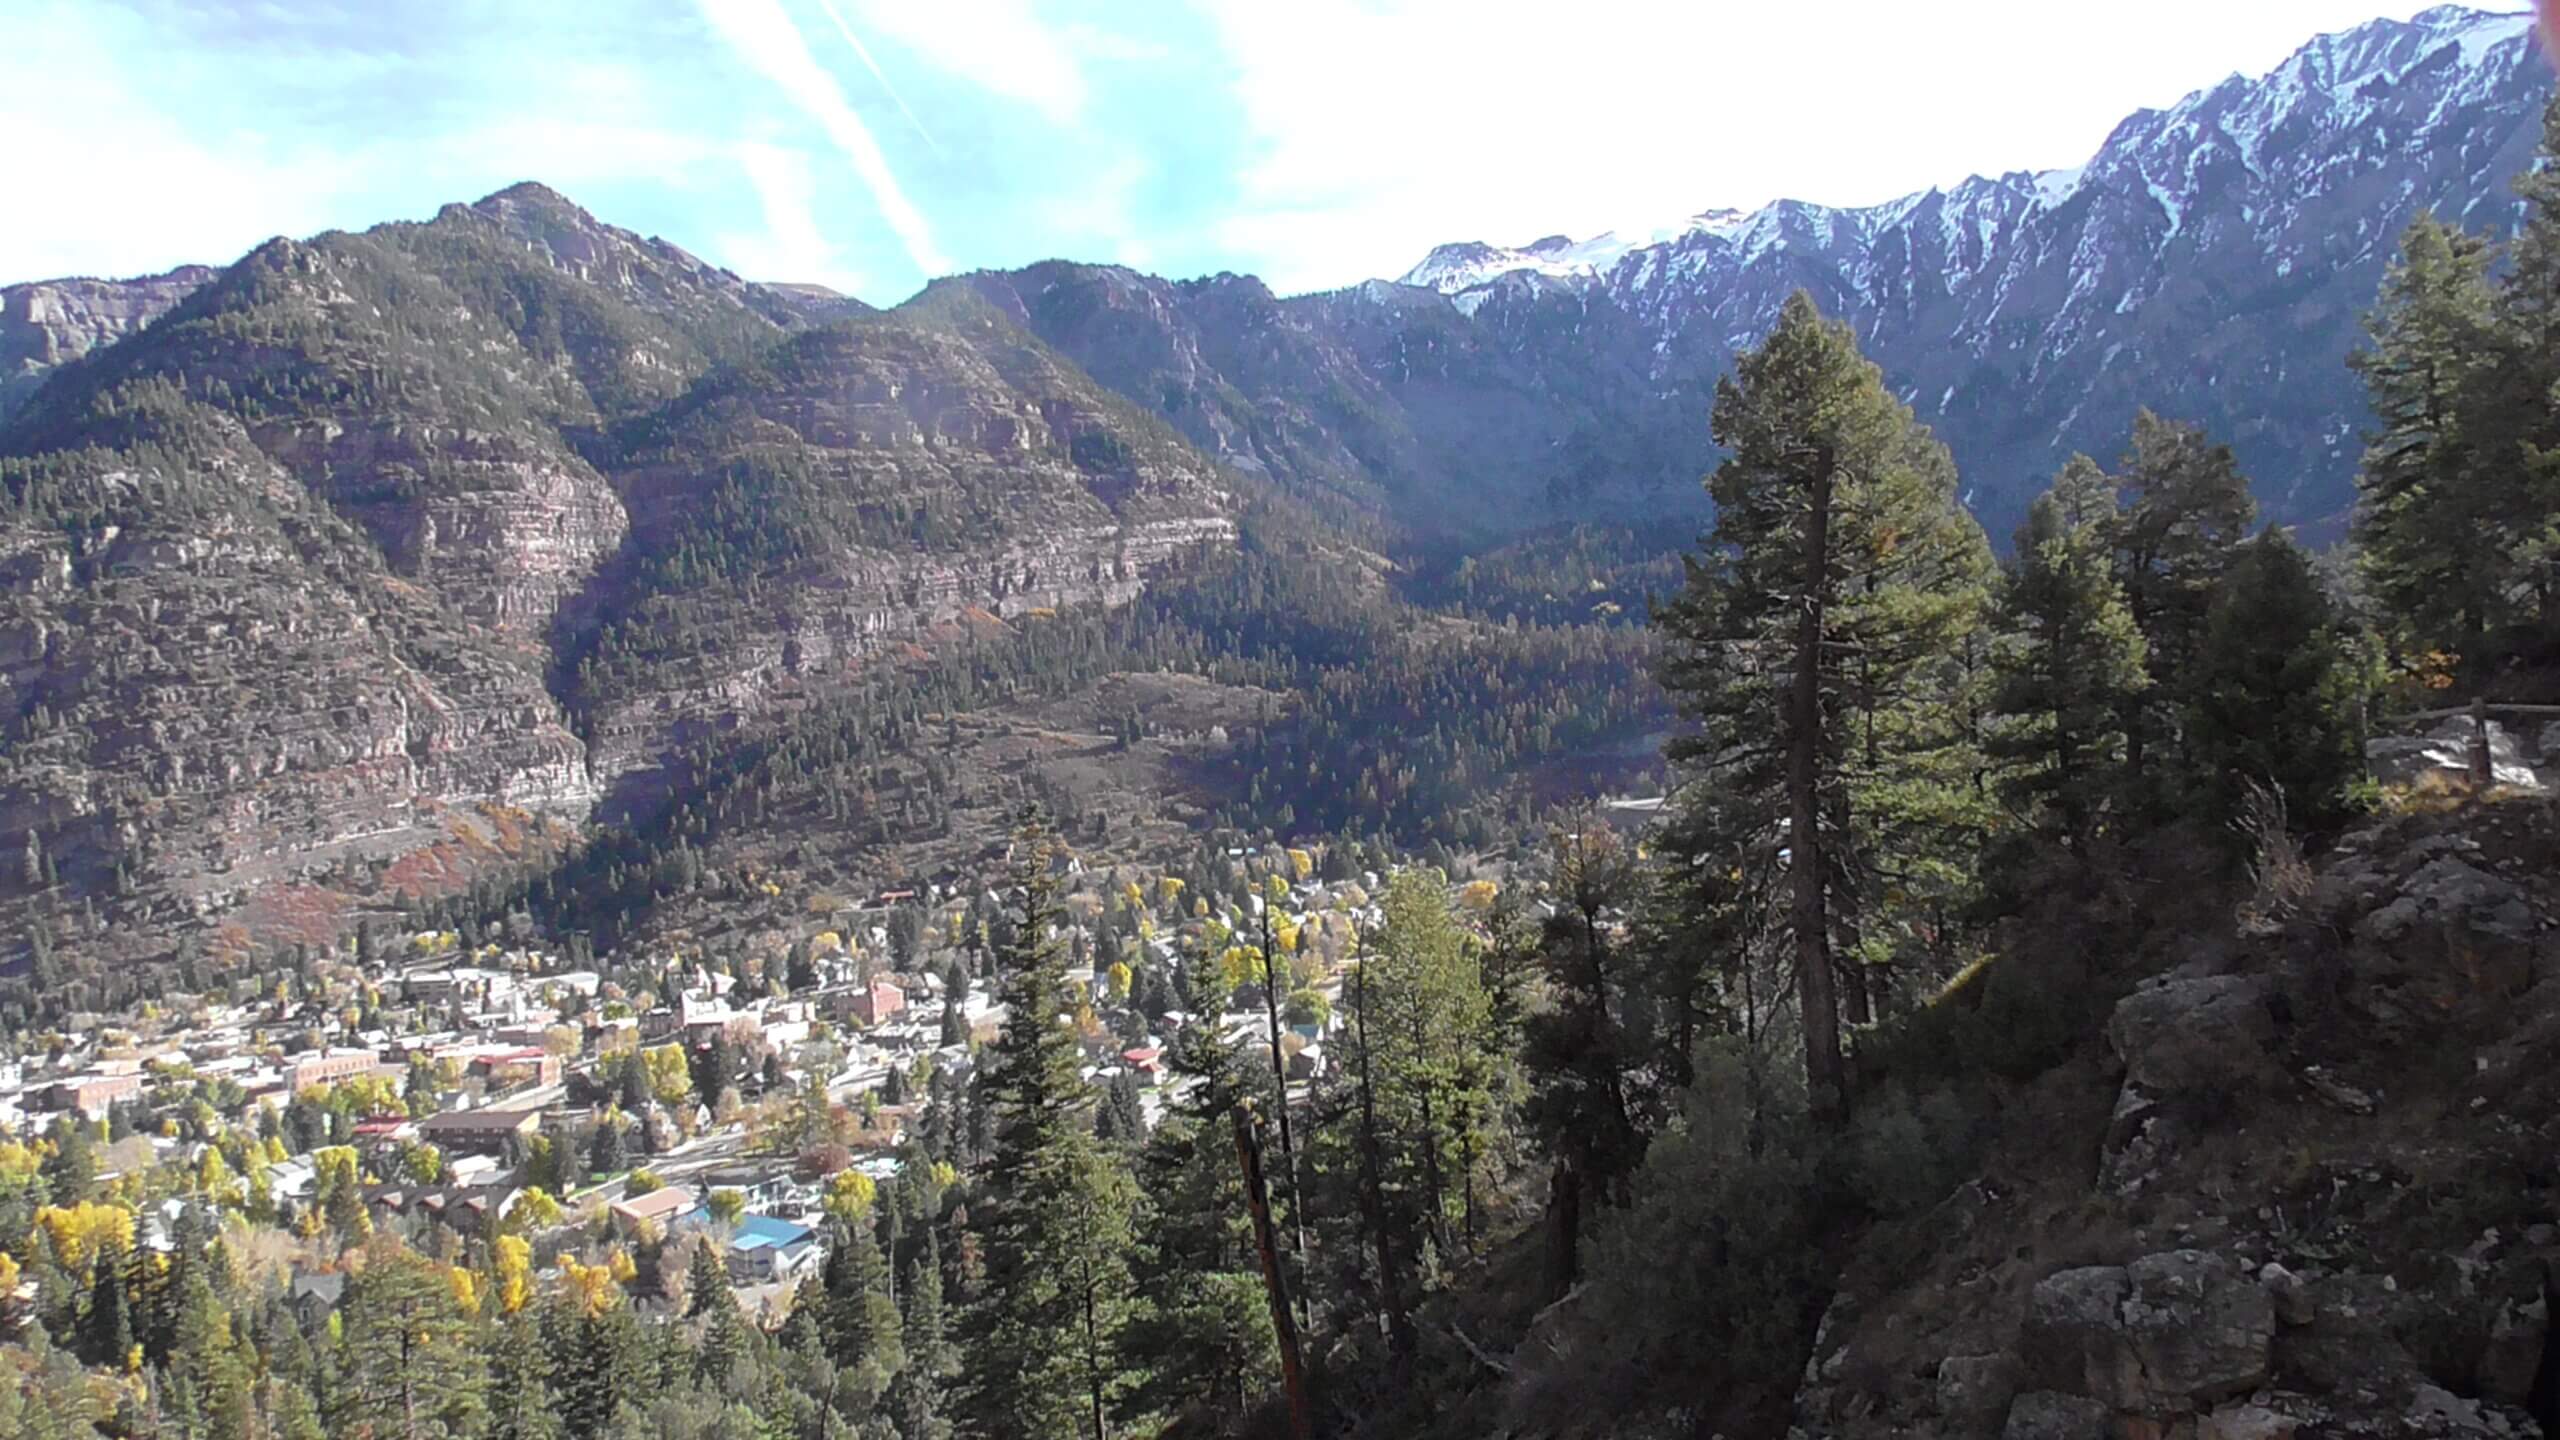 Town of Ouray, Highway 550, Colorado